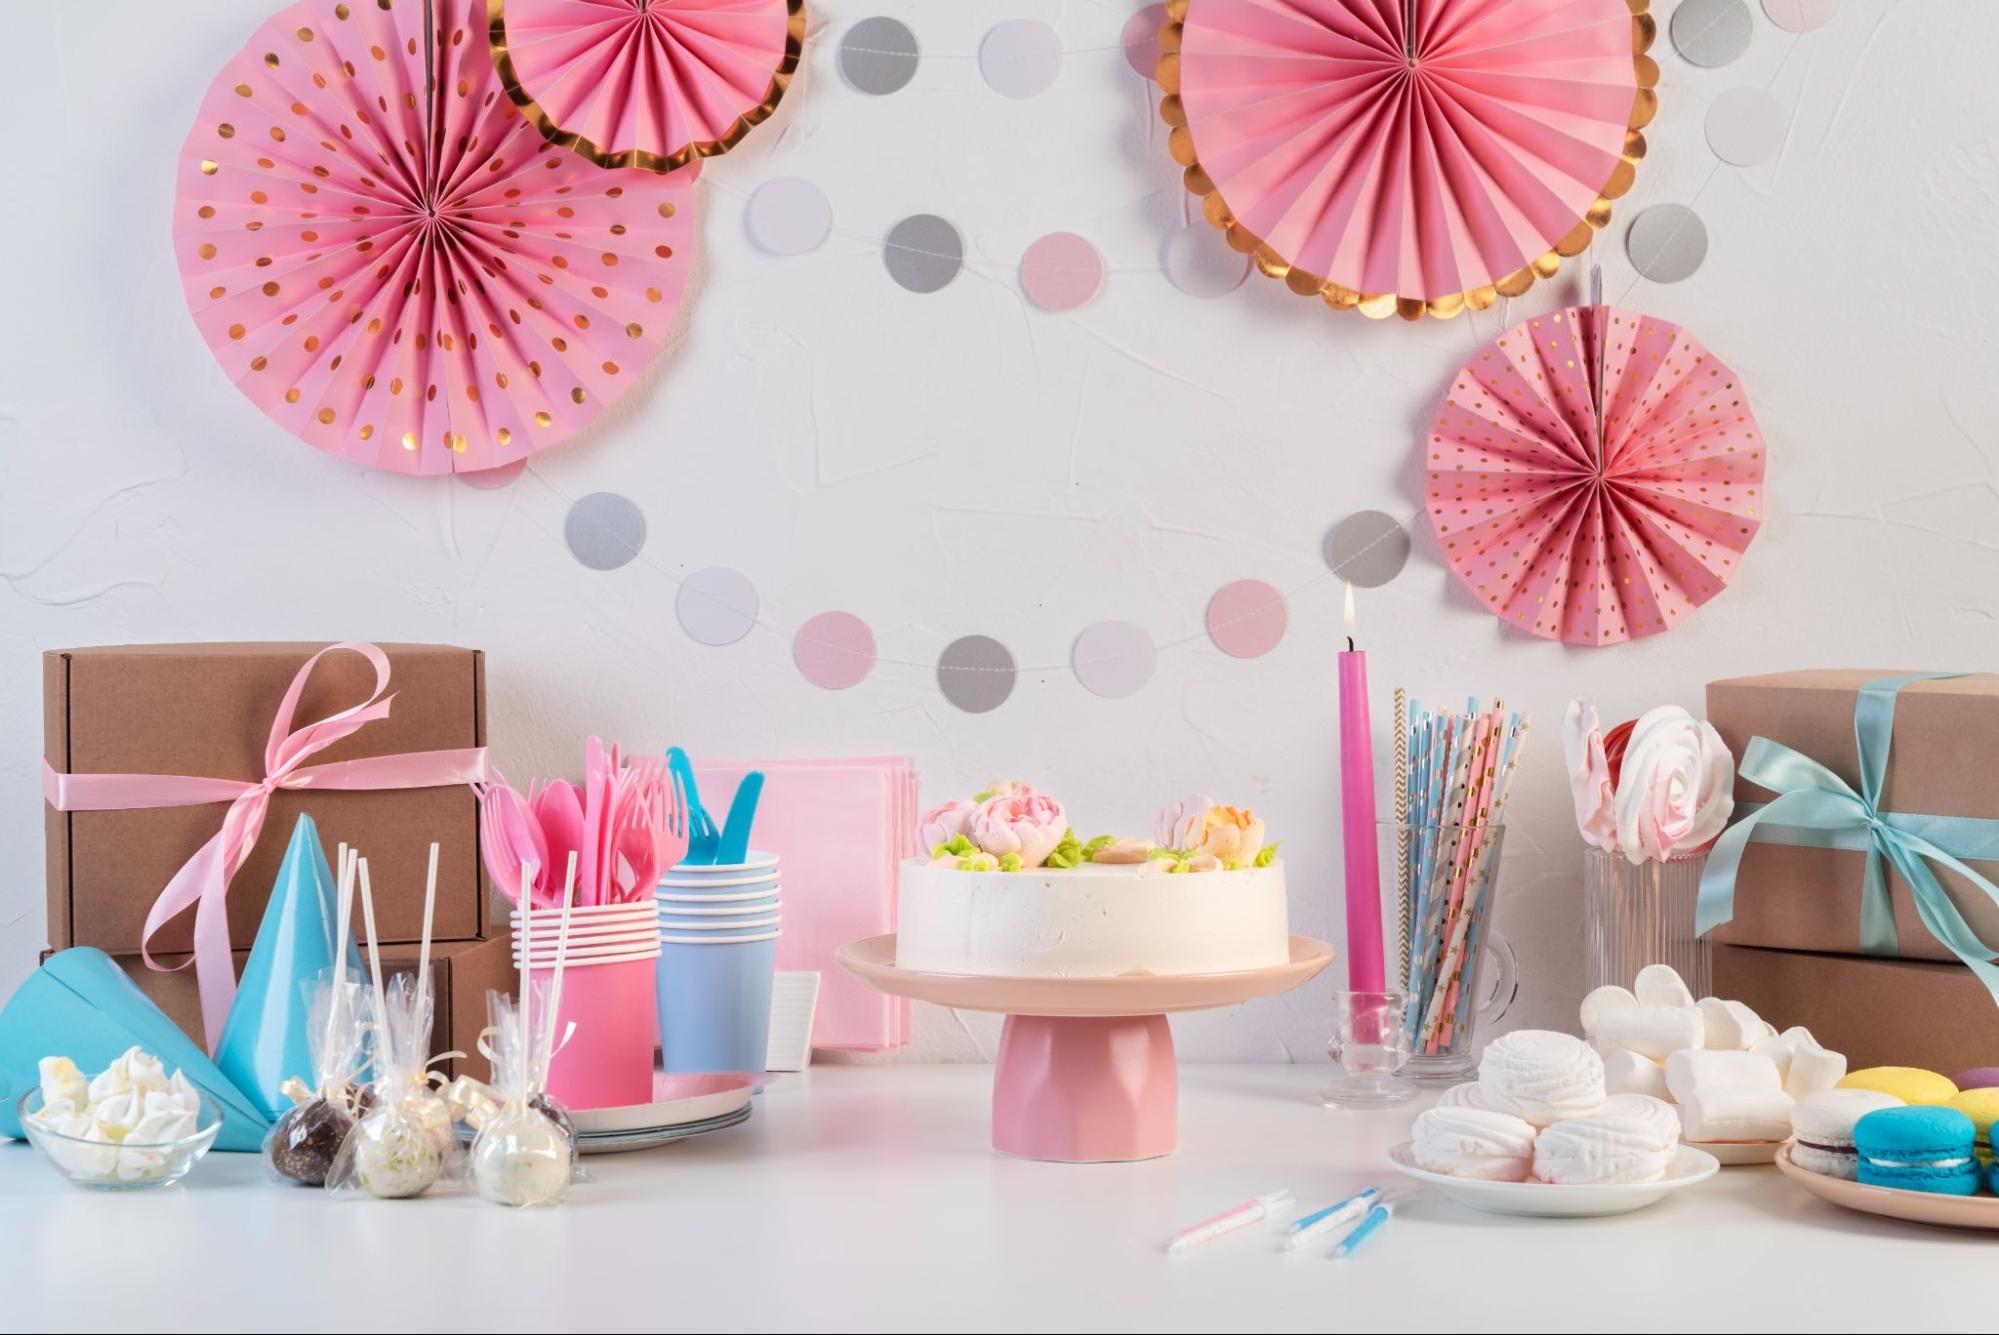 How to Decorate a Property for a Birthday Party at Home